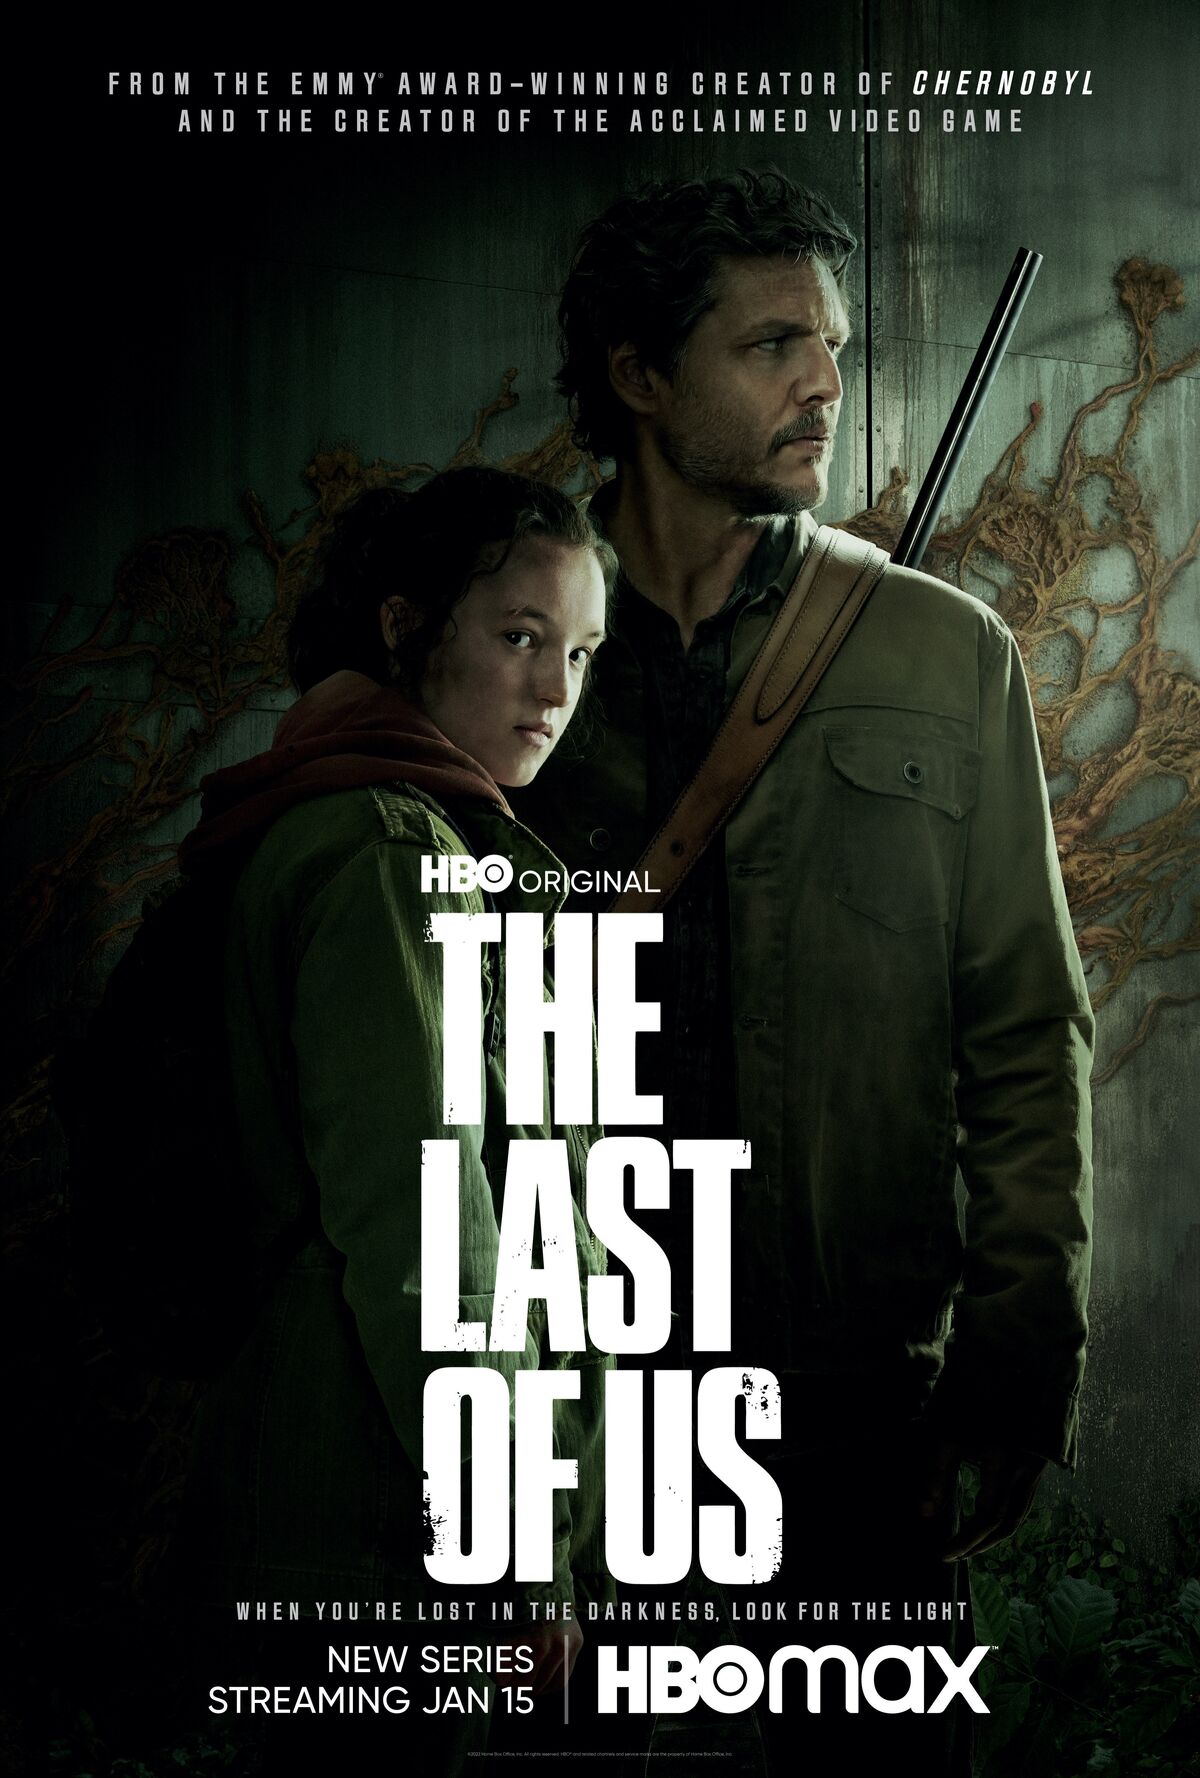 The Last of Us' Premiere: HBO Announces Ratings for Debut Episode